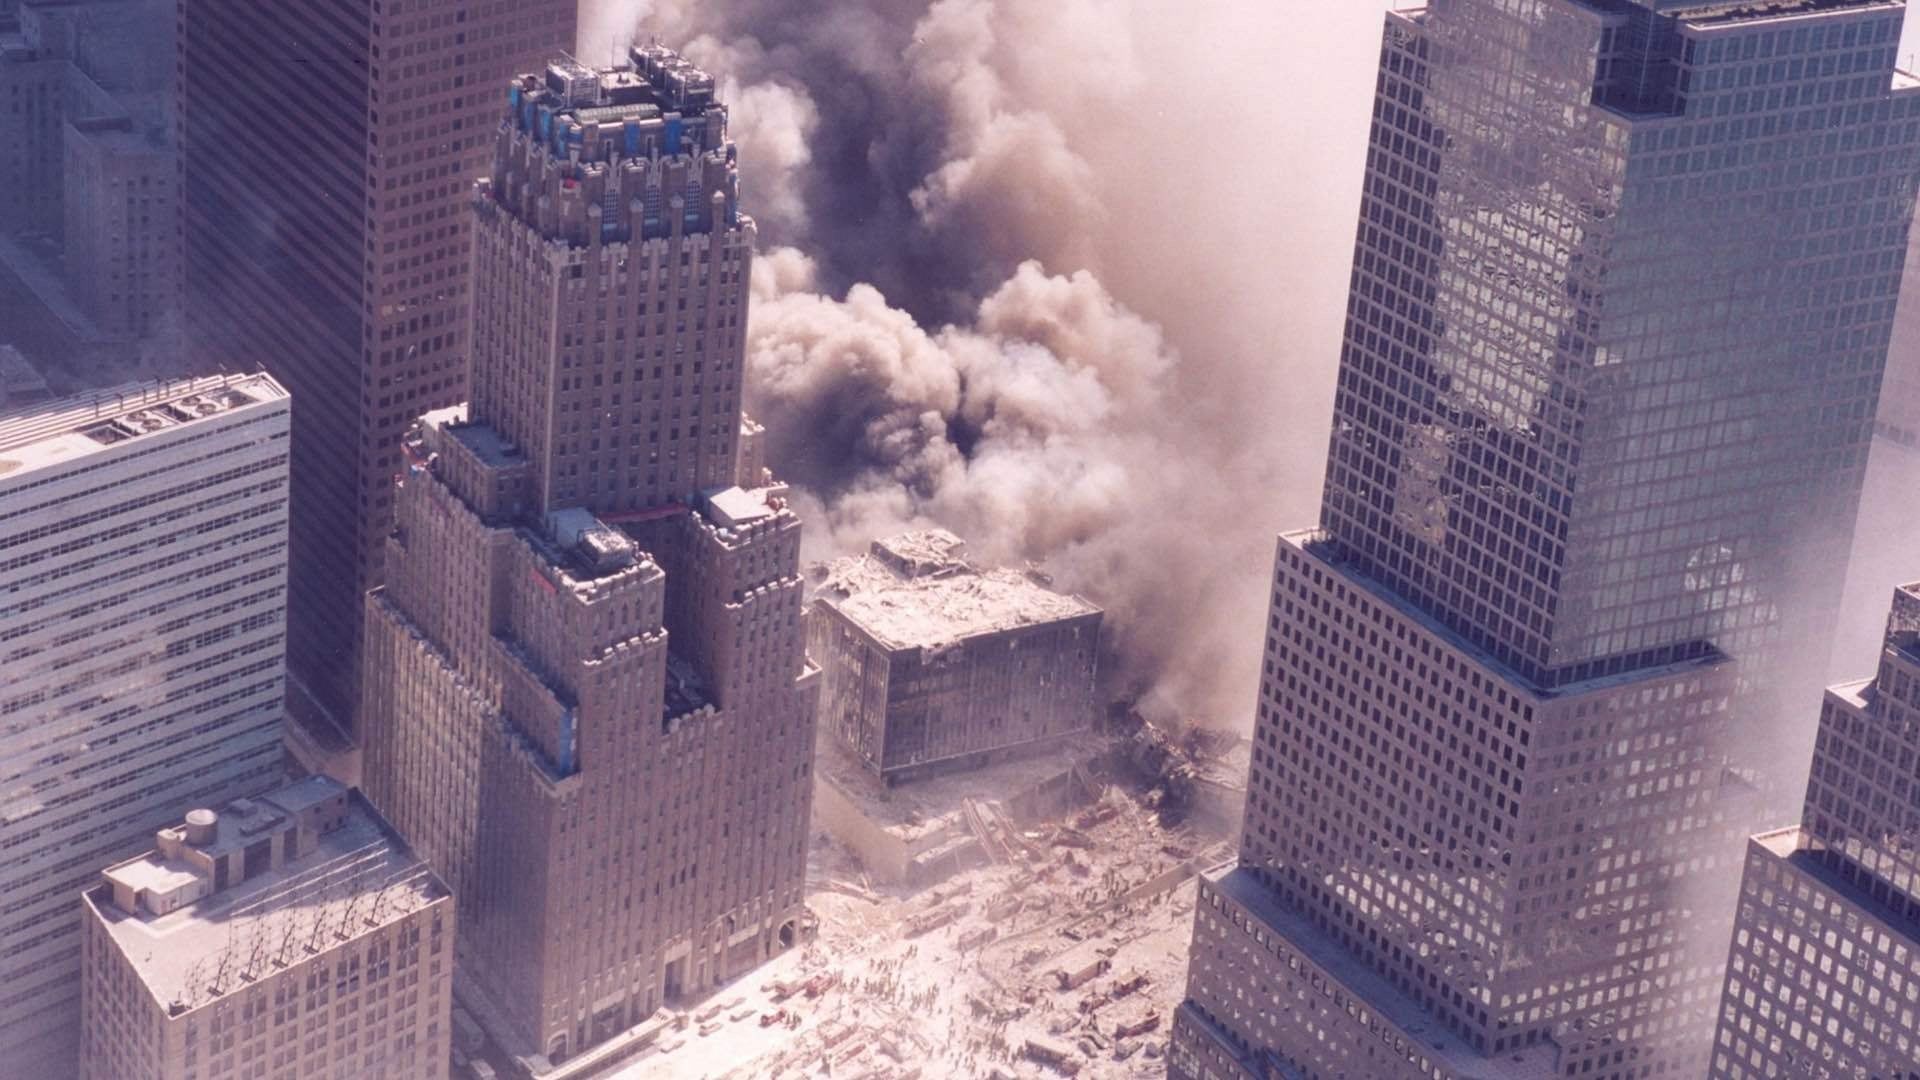 National Geographic: Inside 9/11 background